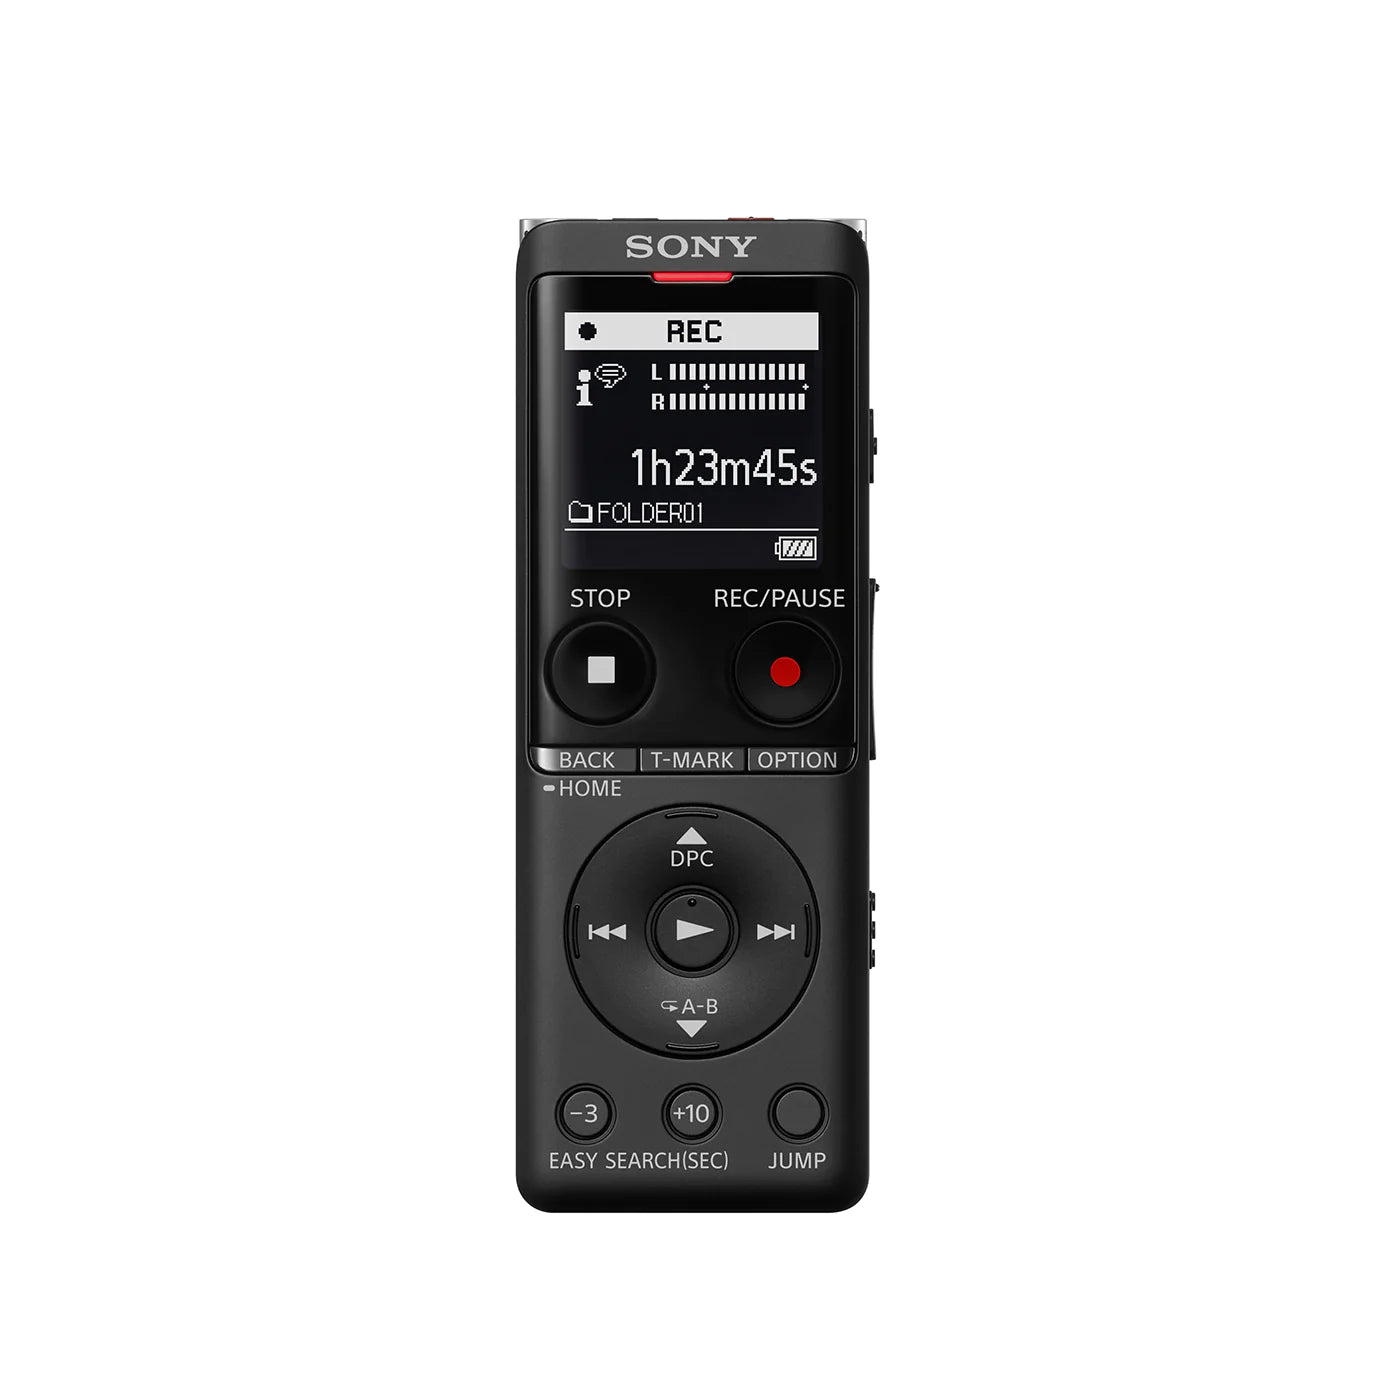 High Quality Voice Recording with Sony ICD-UX570F